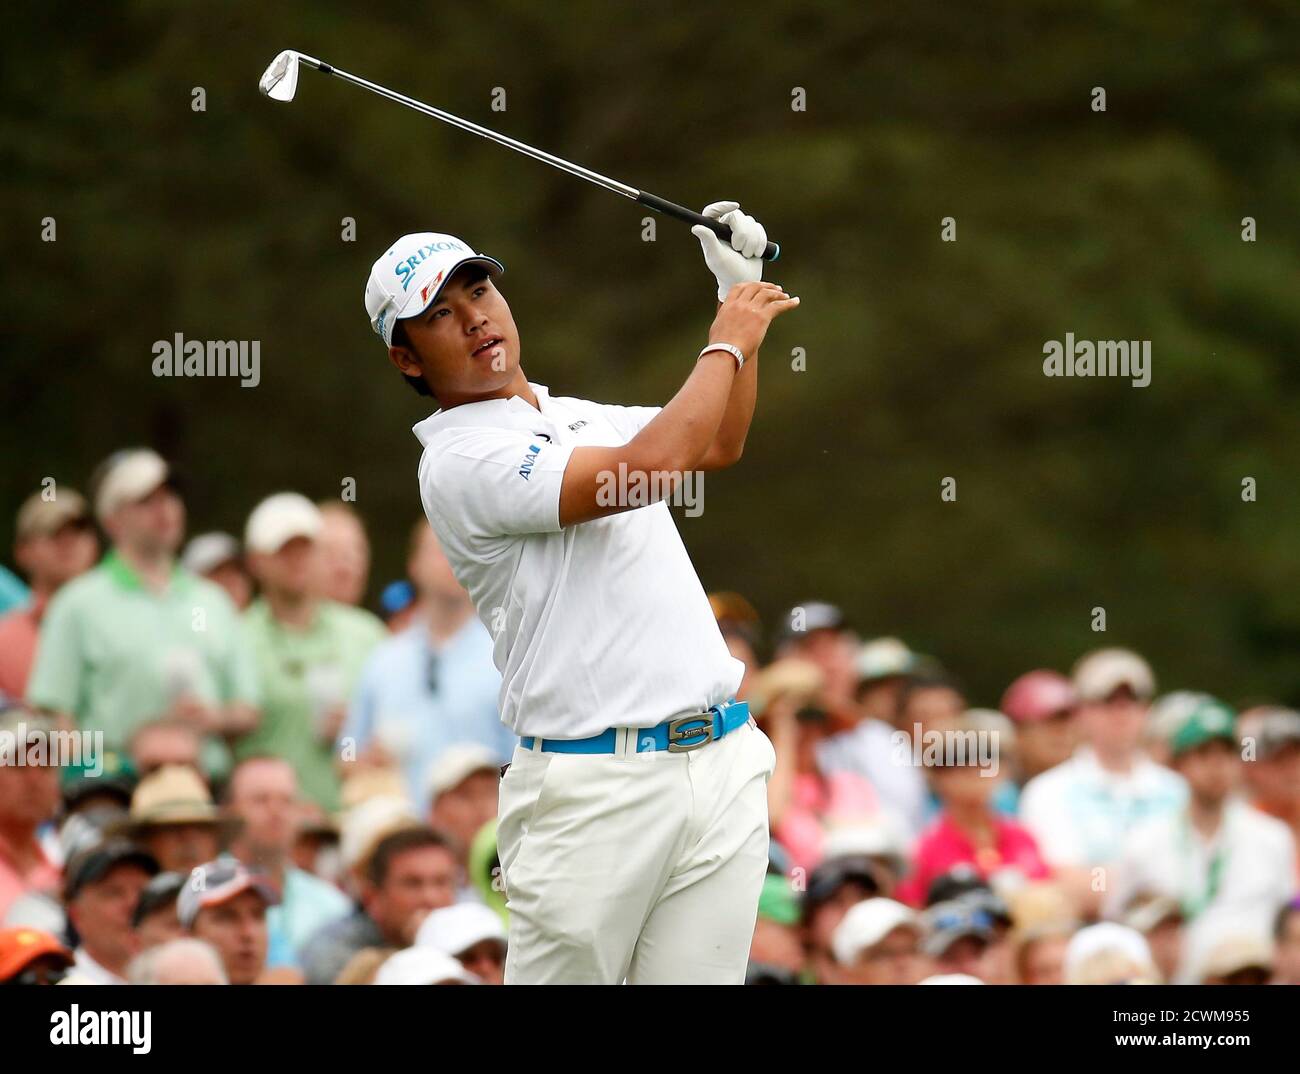 Hideki Matsuyama of Japan hits off the 12th tee during final round play of the Masters golf tournament at the Augusta National Golf Course in Augusta, Georgia April 12, 2015.   REUTERS/Jim Young Stock Photo